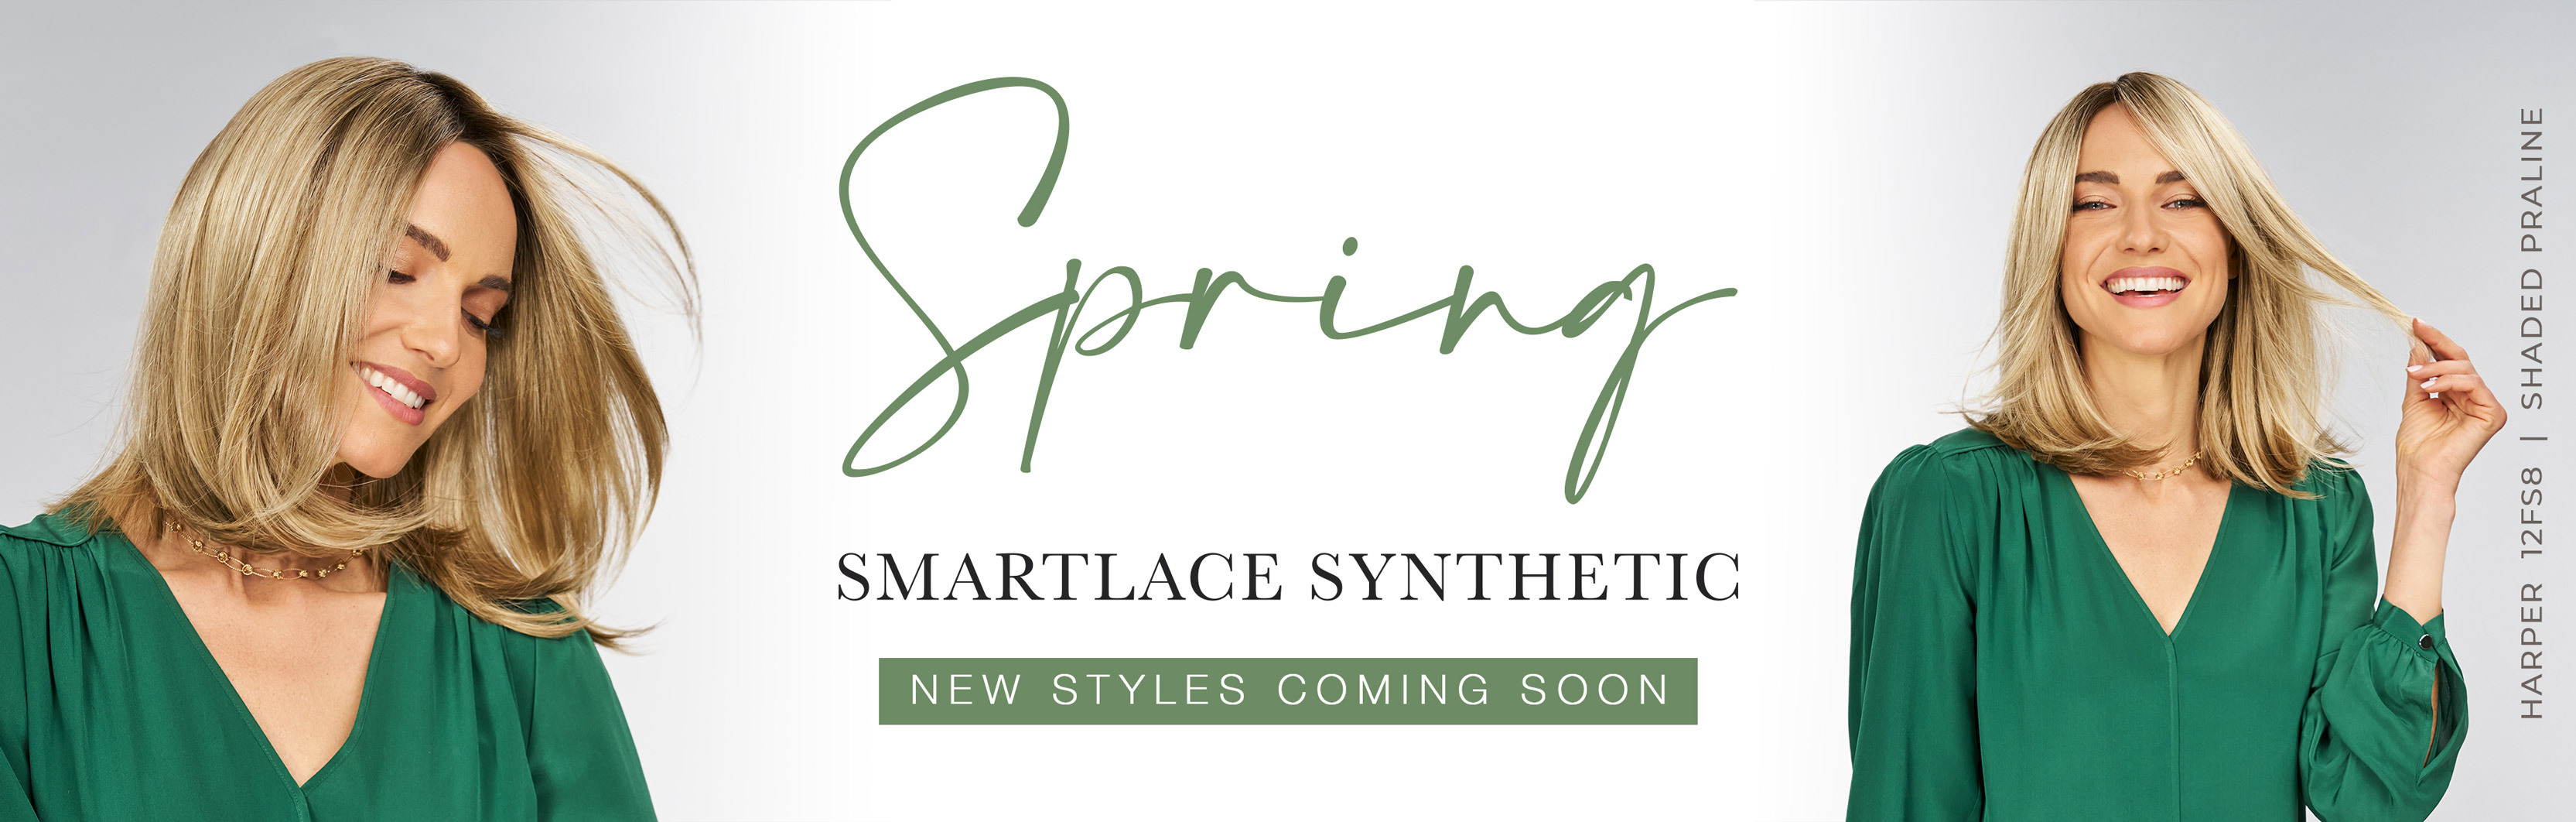 Smartlace Synthetic Coming Soon!